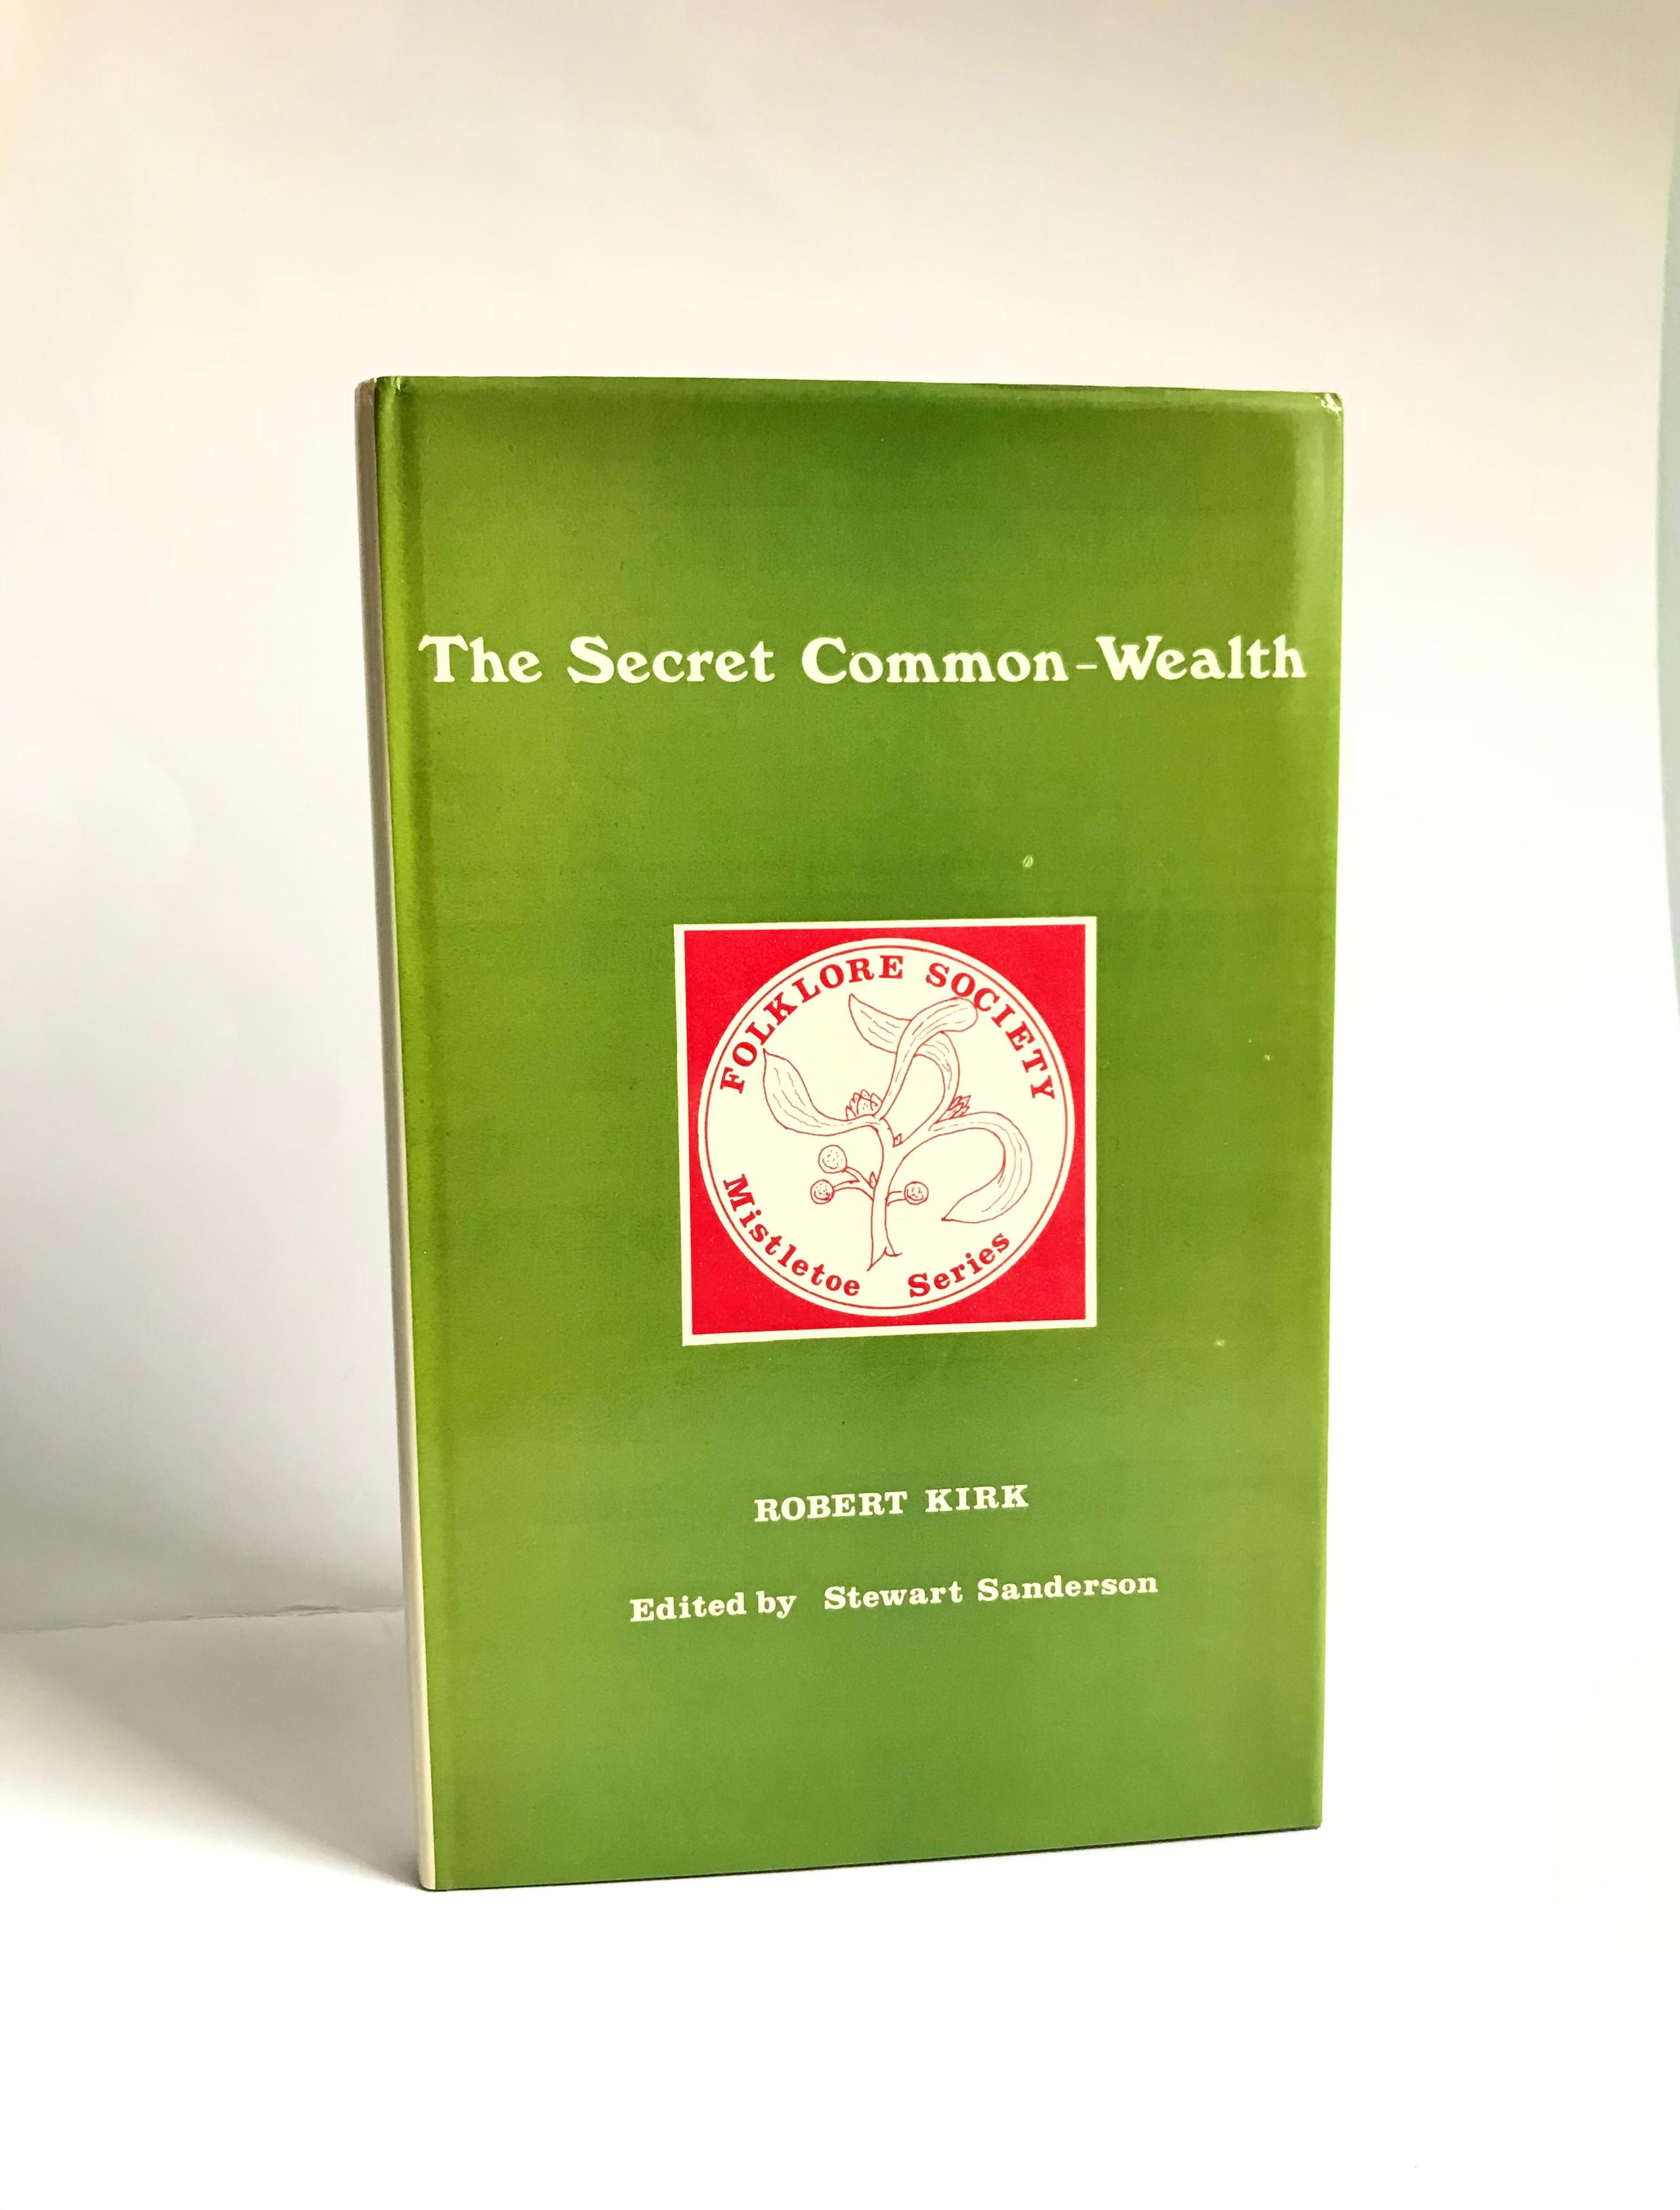 The Secret Common-Wealth & A Short Treatise On Charms & Spells by Robert Kirk